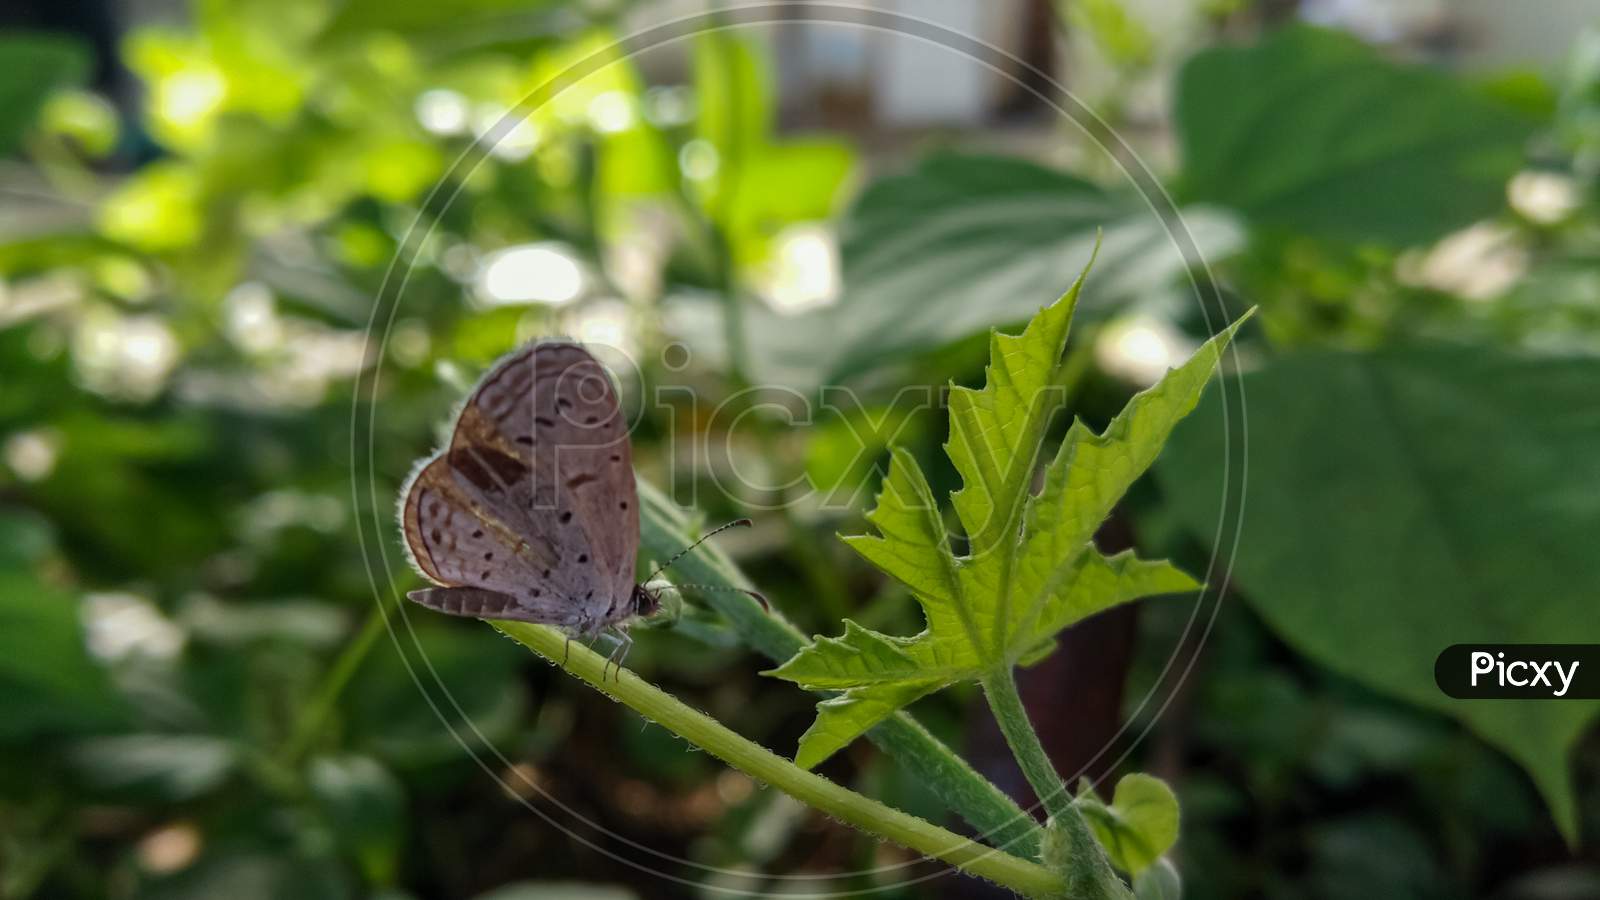 Butterfly on the green leaf